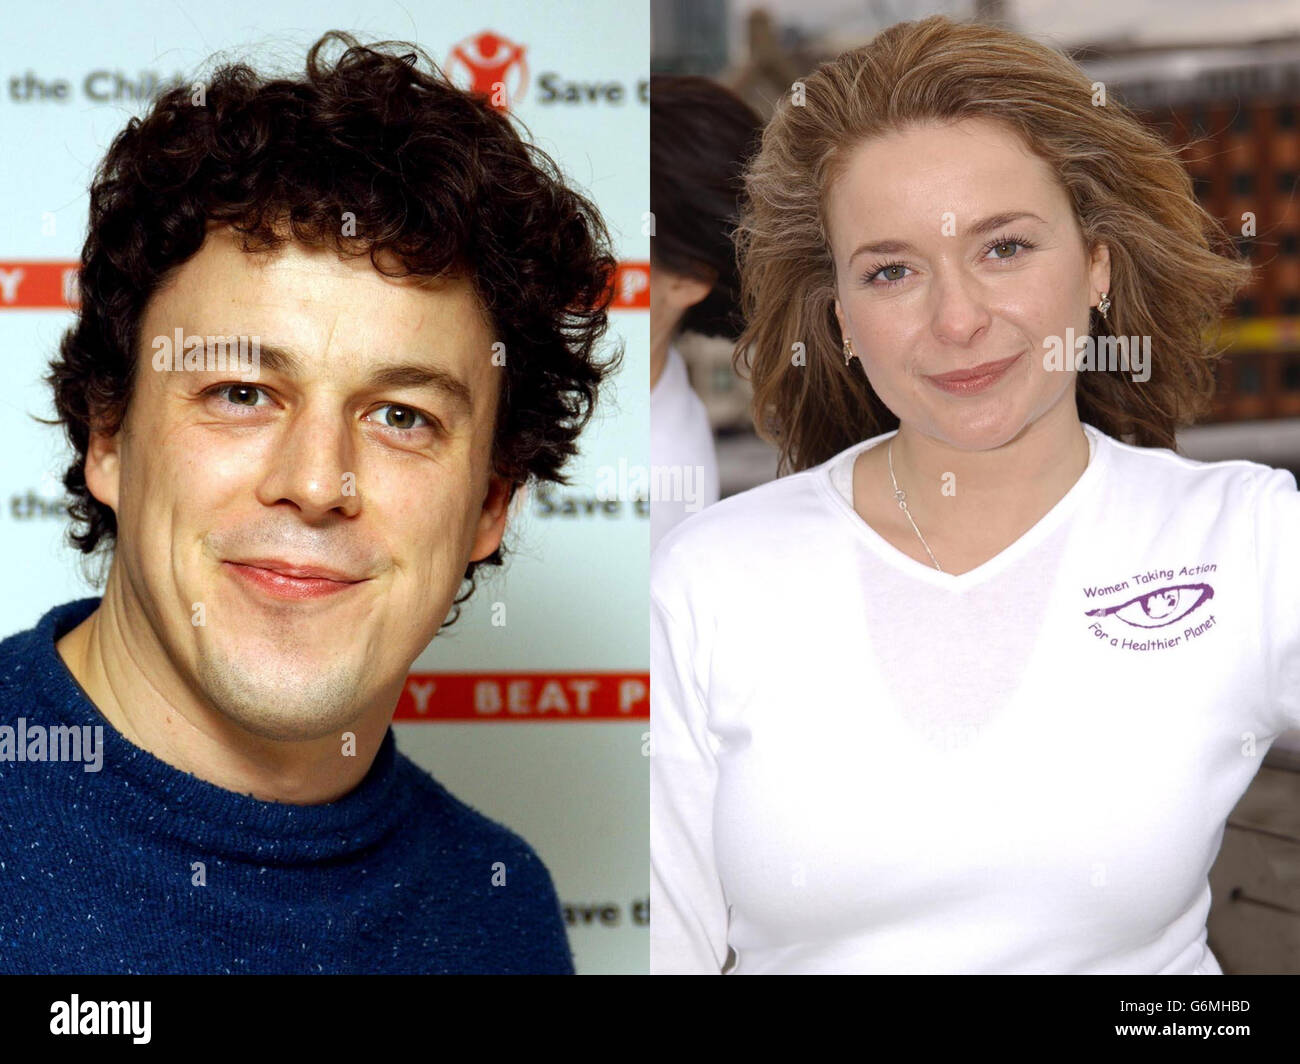 Composite file pictures of Actor Alan Davies at a Save the Children fundraising event in Aldwych, London, 28/11/2002 and his girlfriend Actress Julia Sawalha at a WEN (Women Taking Action for a Healthier Planet) photocall on the Millennium Bridge, London, 8/3/2003. The couple have said Tuesday 6 January 2004 that they are taking action over newspaper reports that they have secretly married. The comic and the Absolutely Fabulous star have denied they have tied the knot in secret as has been reported in some newspapers. Stock Photo